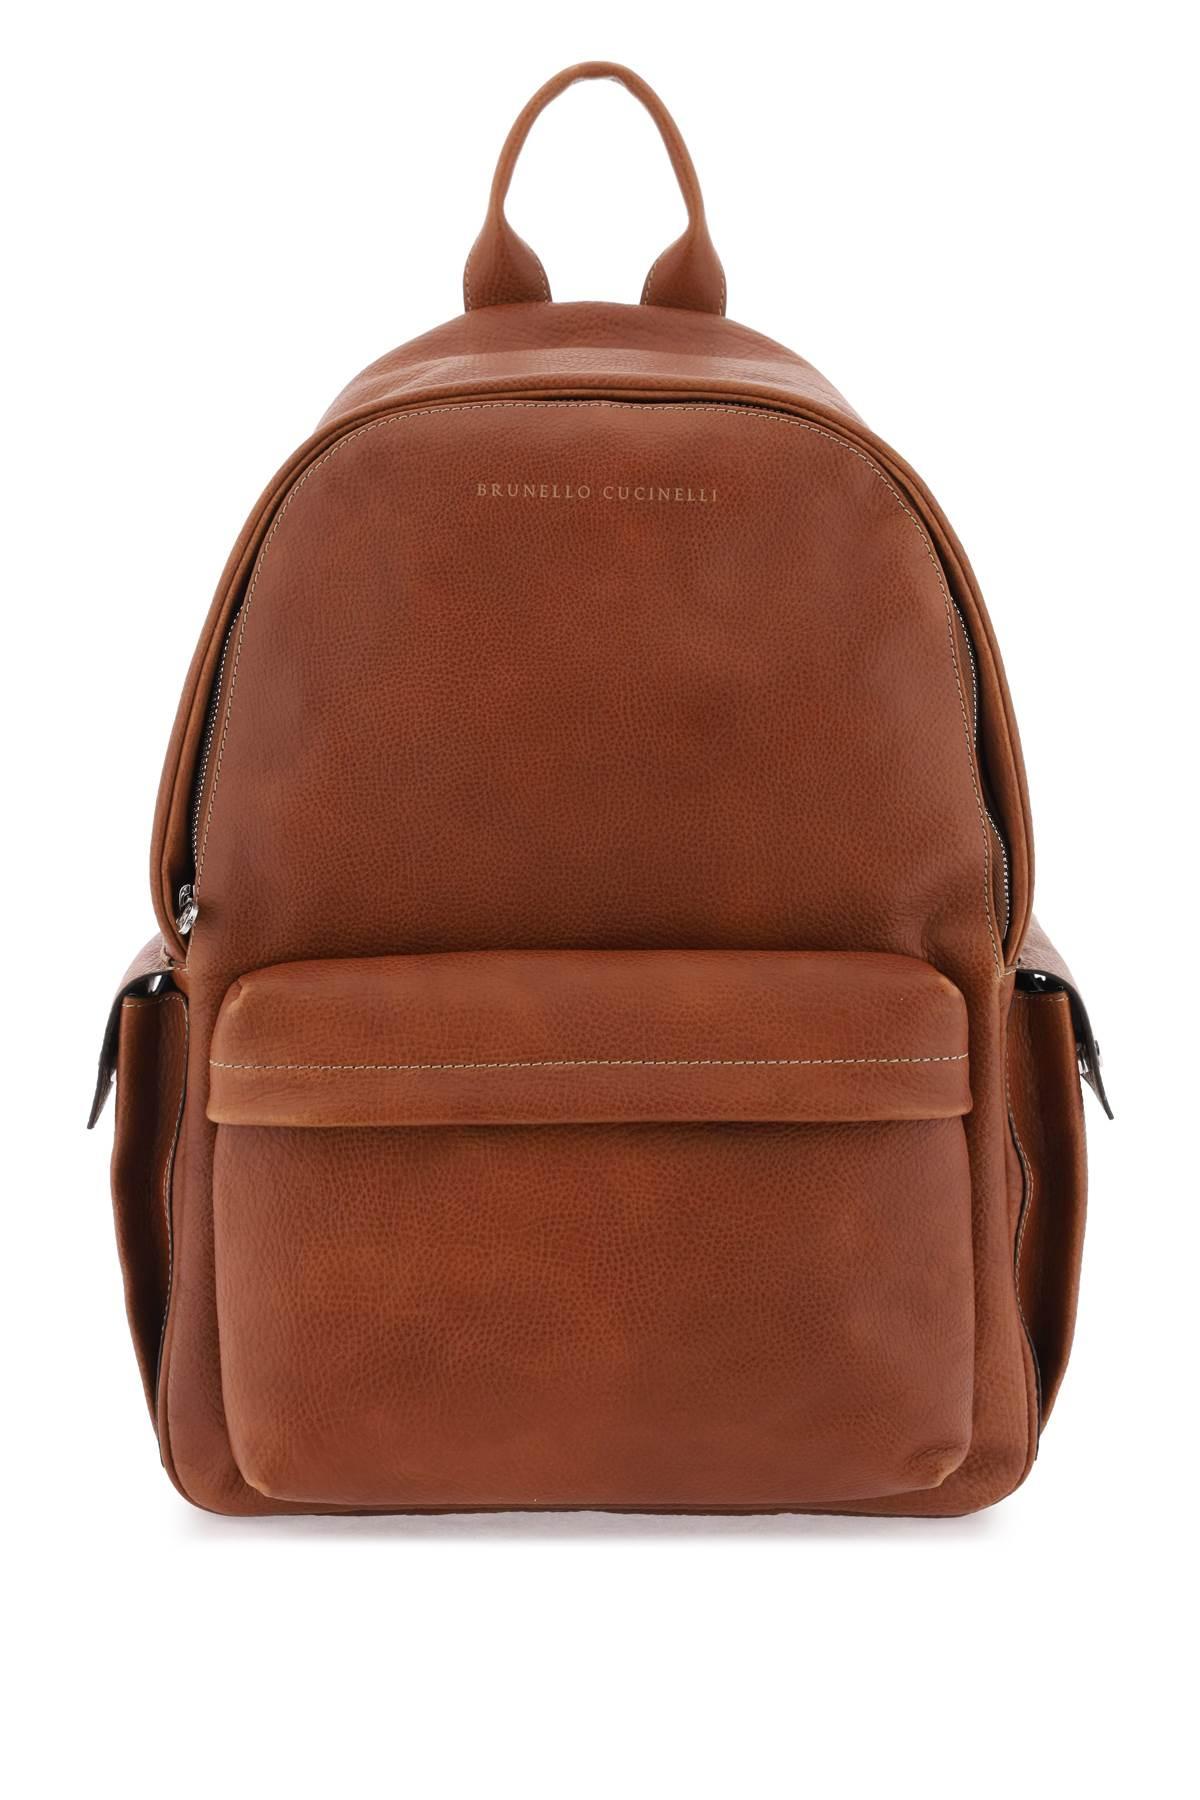 Brunello Cucinelli Buckled Leather Backpack - Farfetch